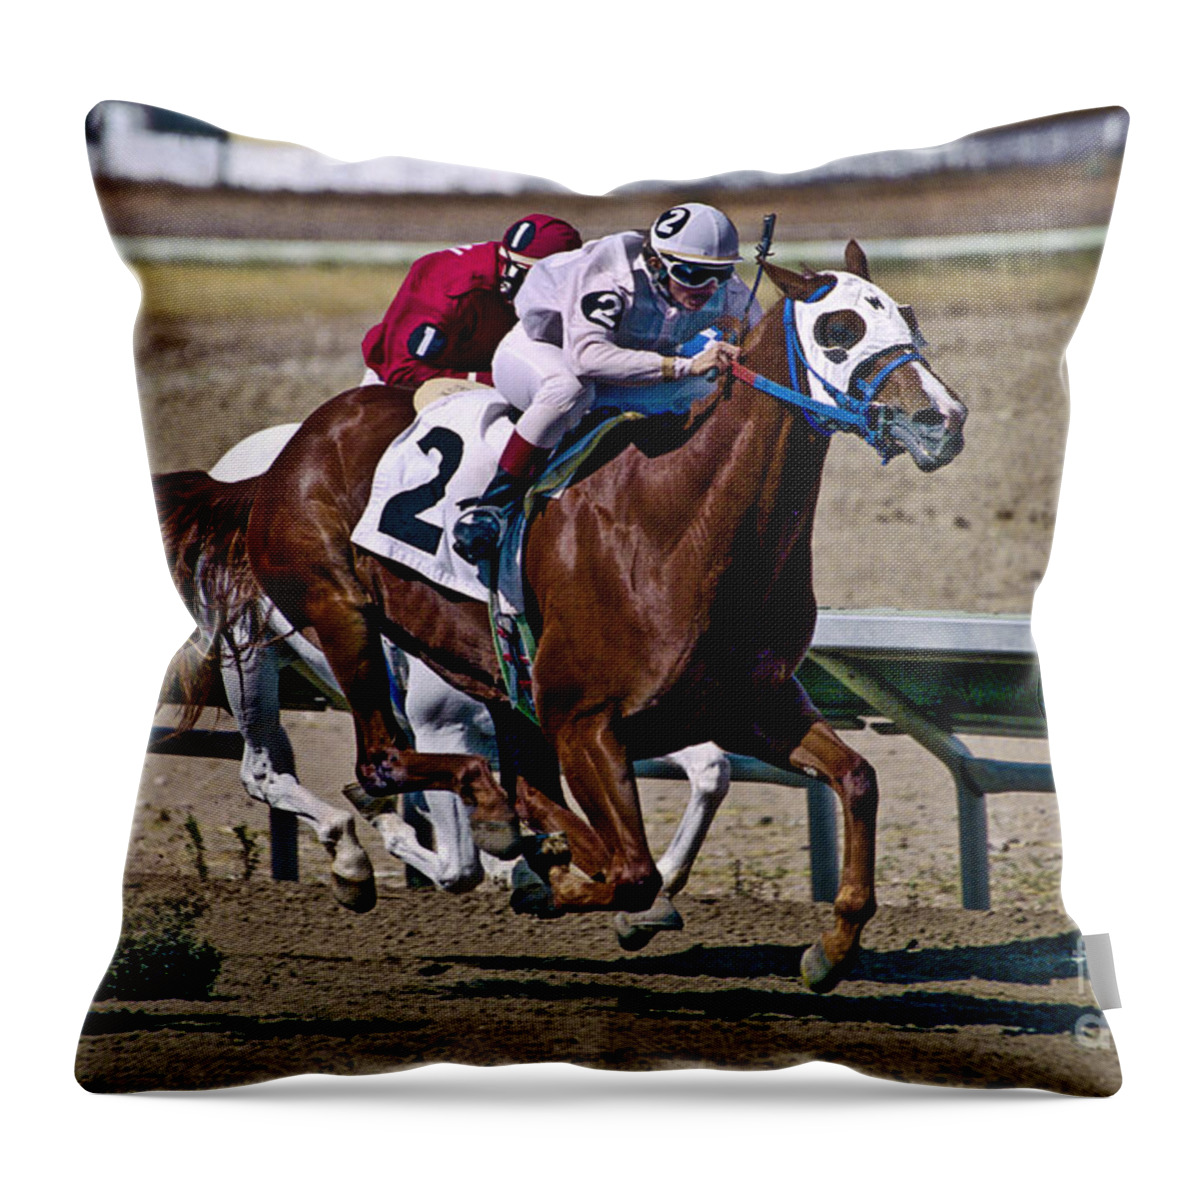 Racing Throw Pillow featuring the photograph Flying Hooves by Kathy McClure